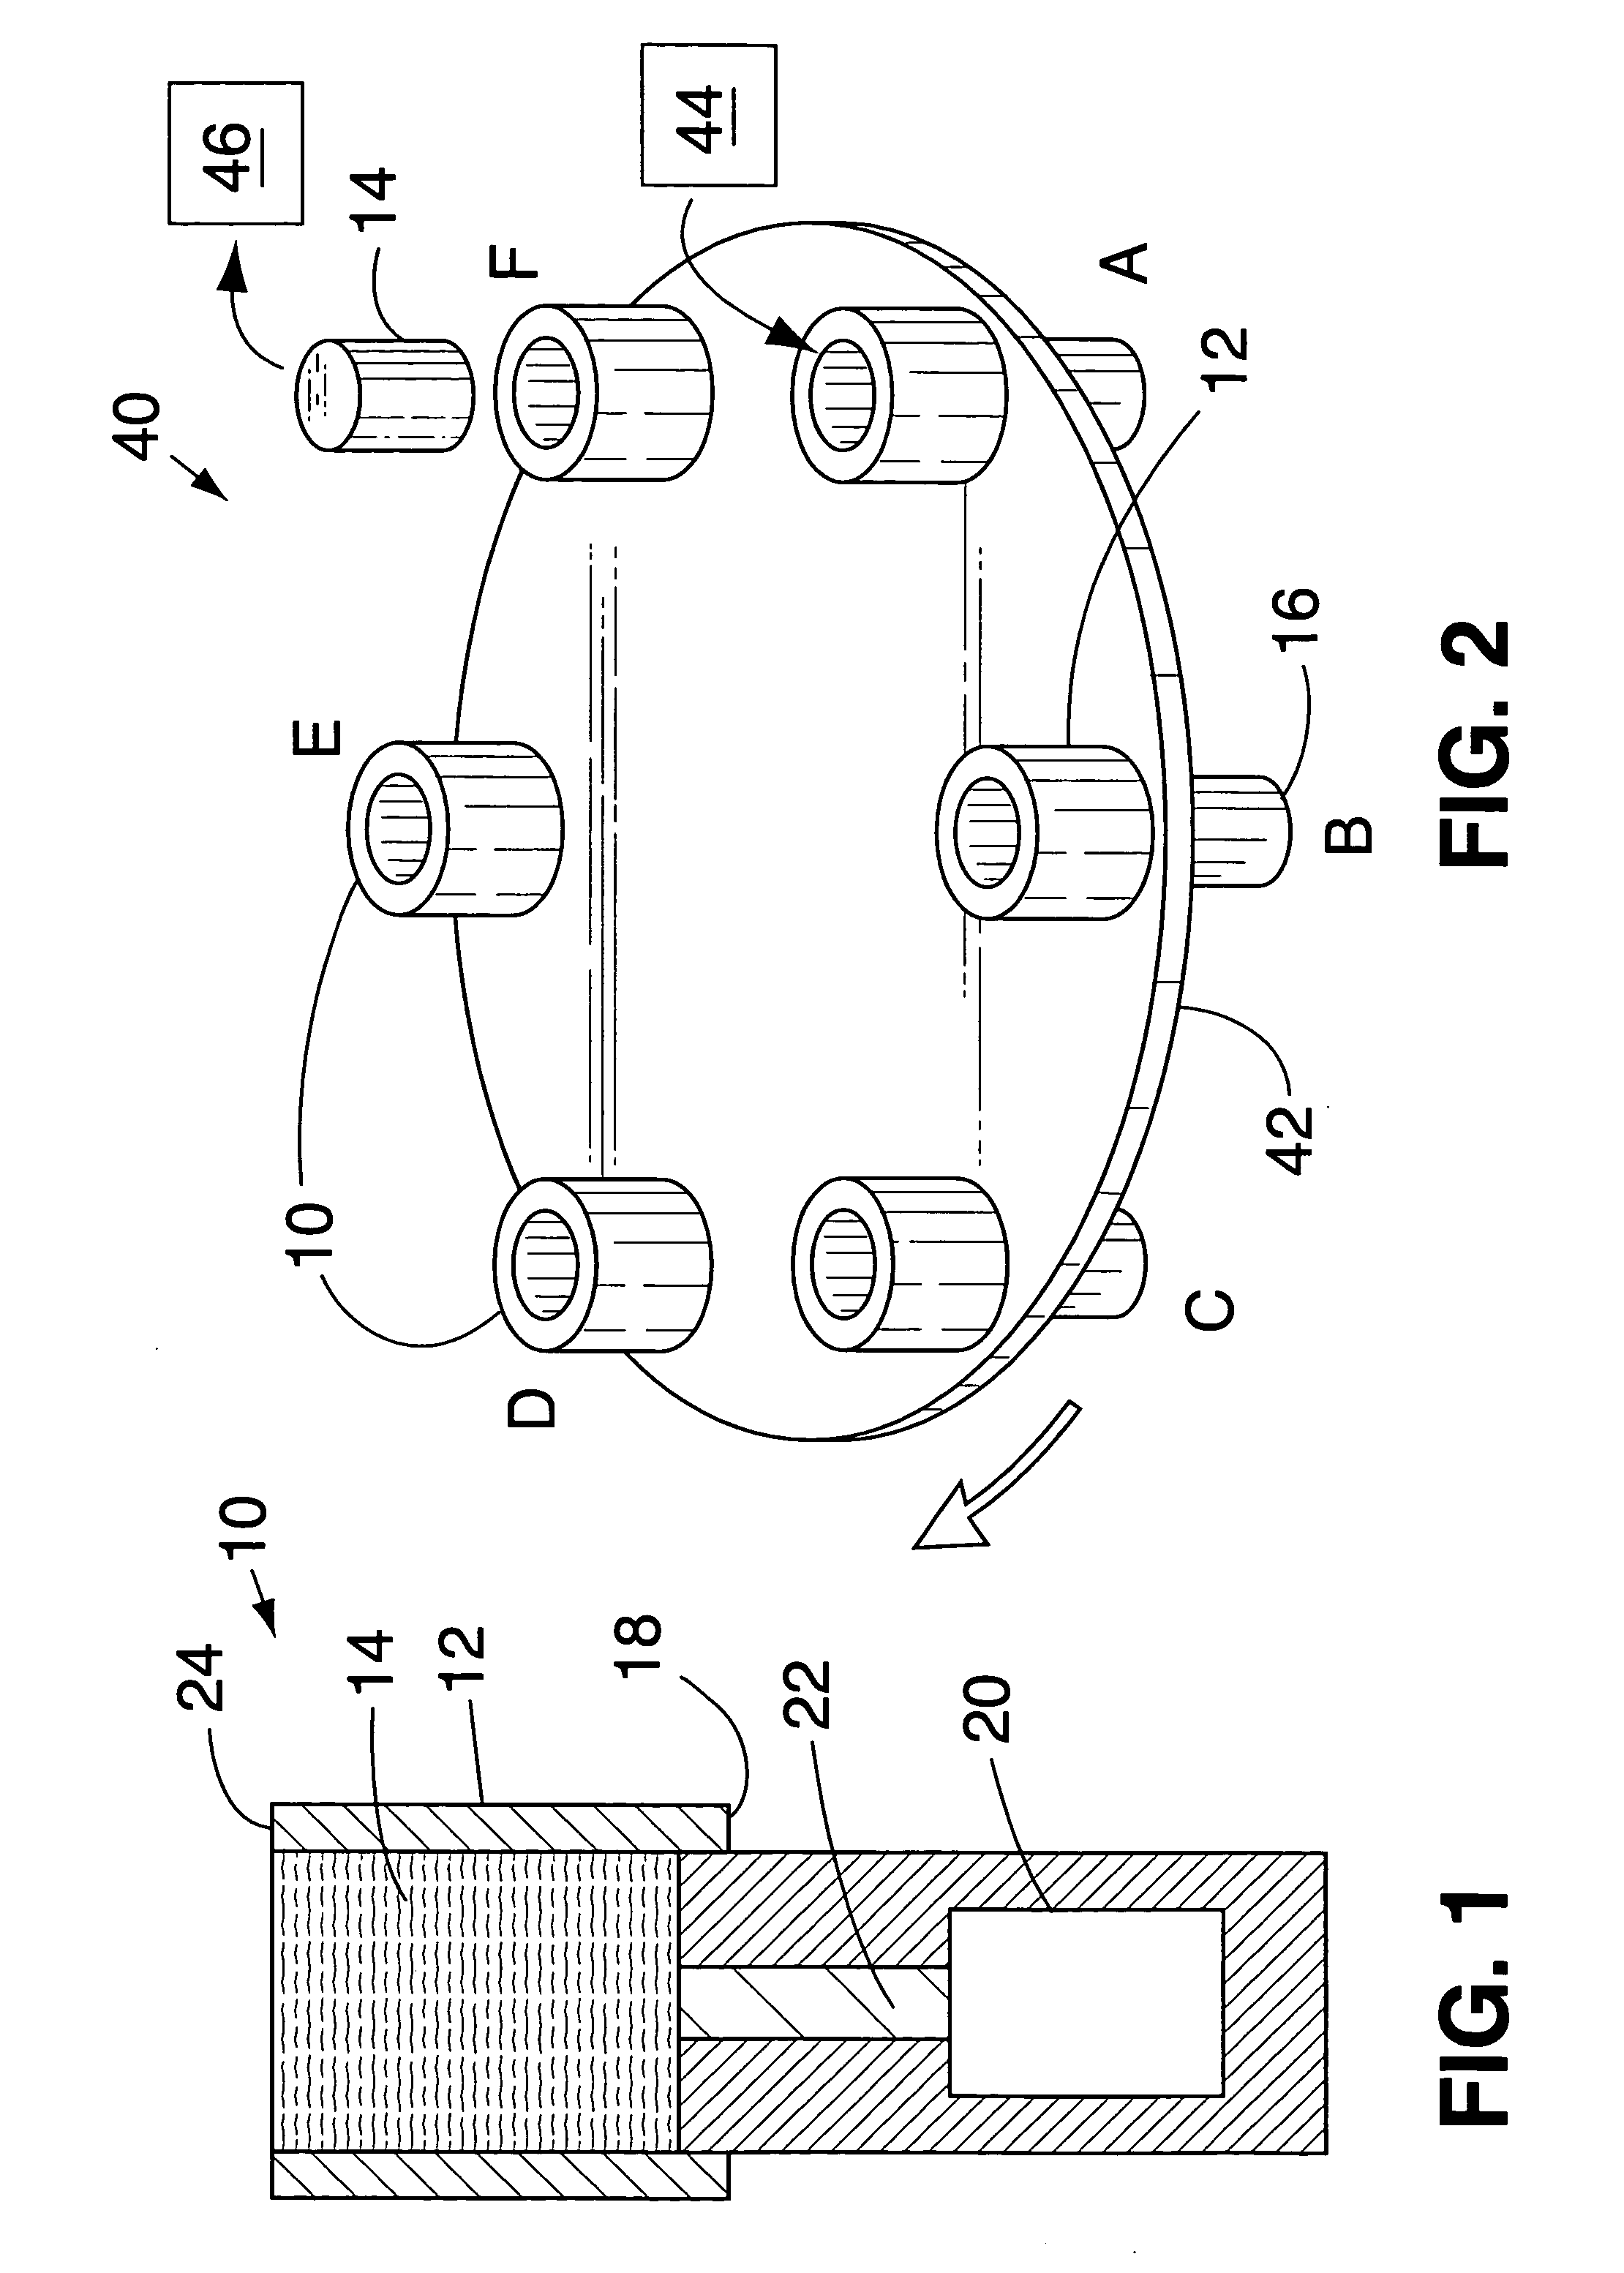 Method and apparatus for semi-solid material processing